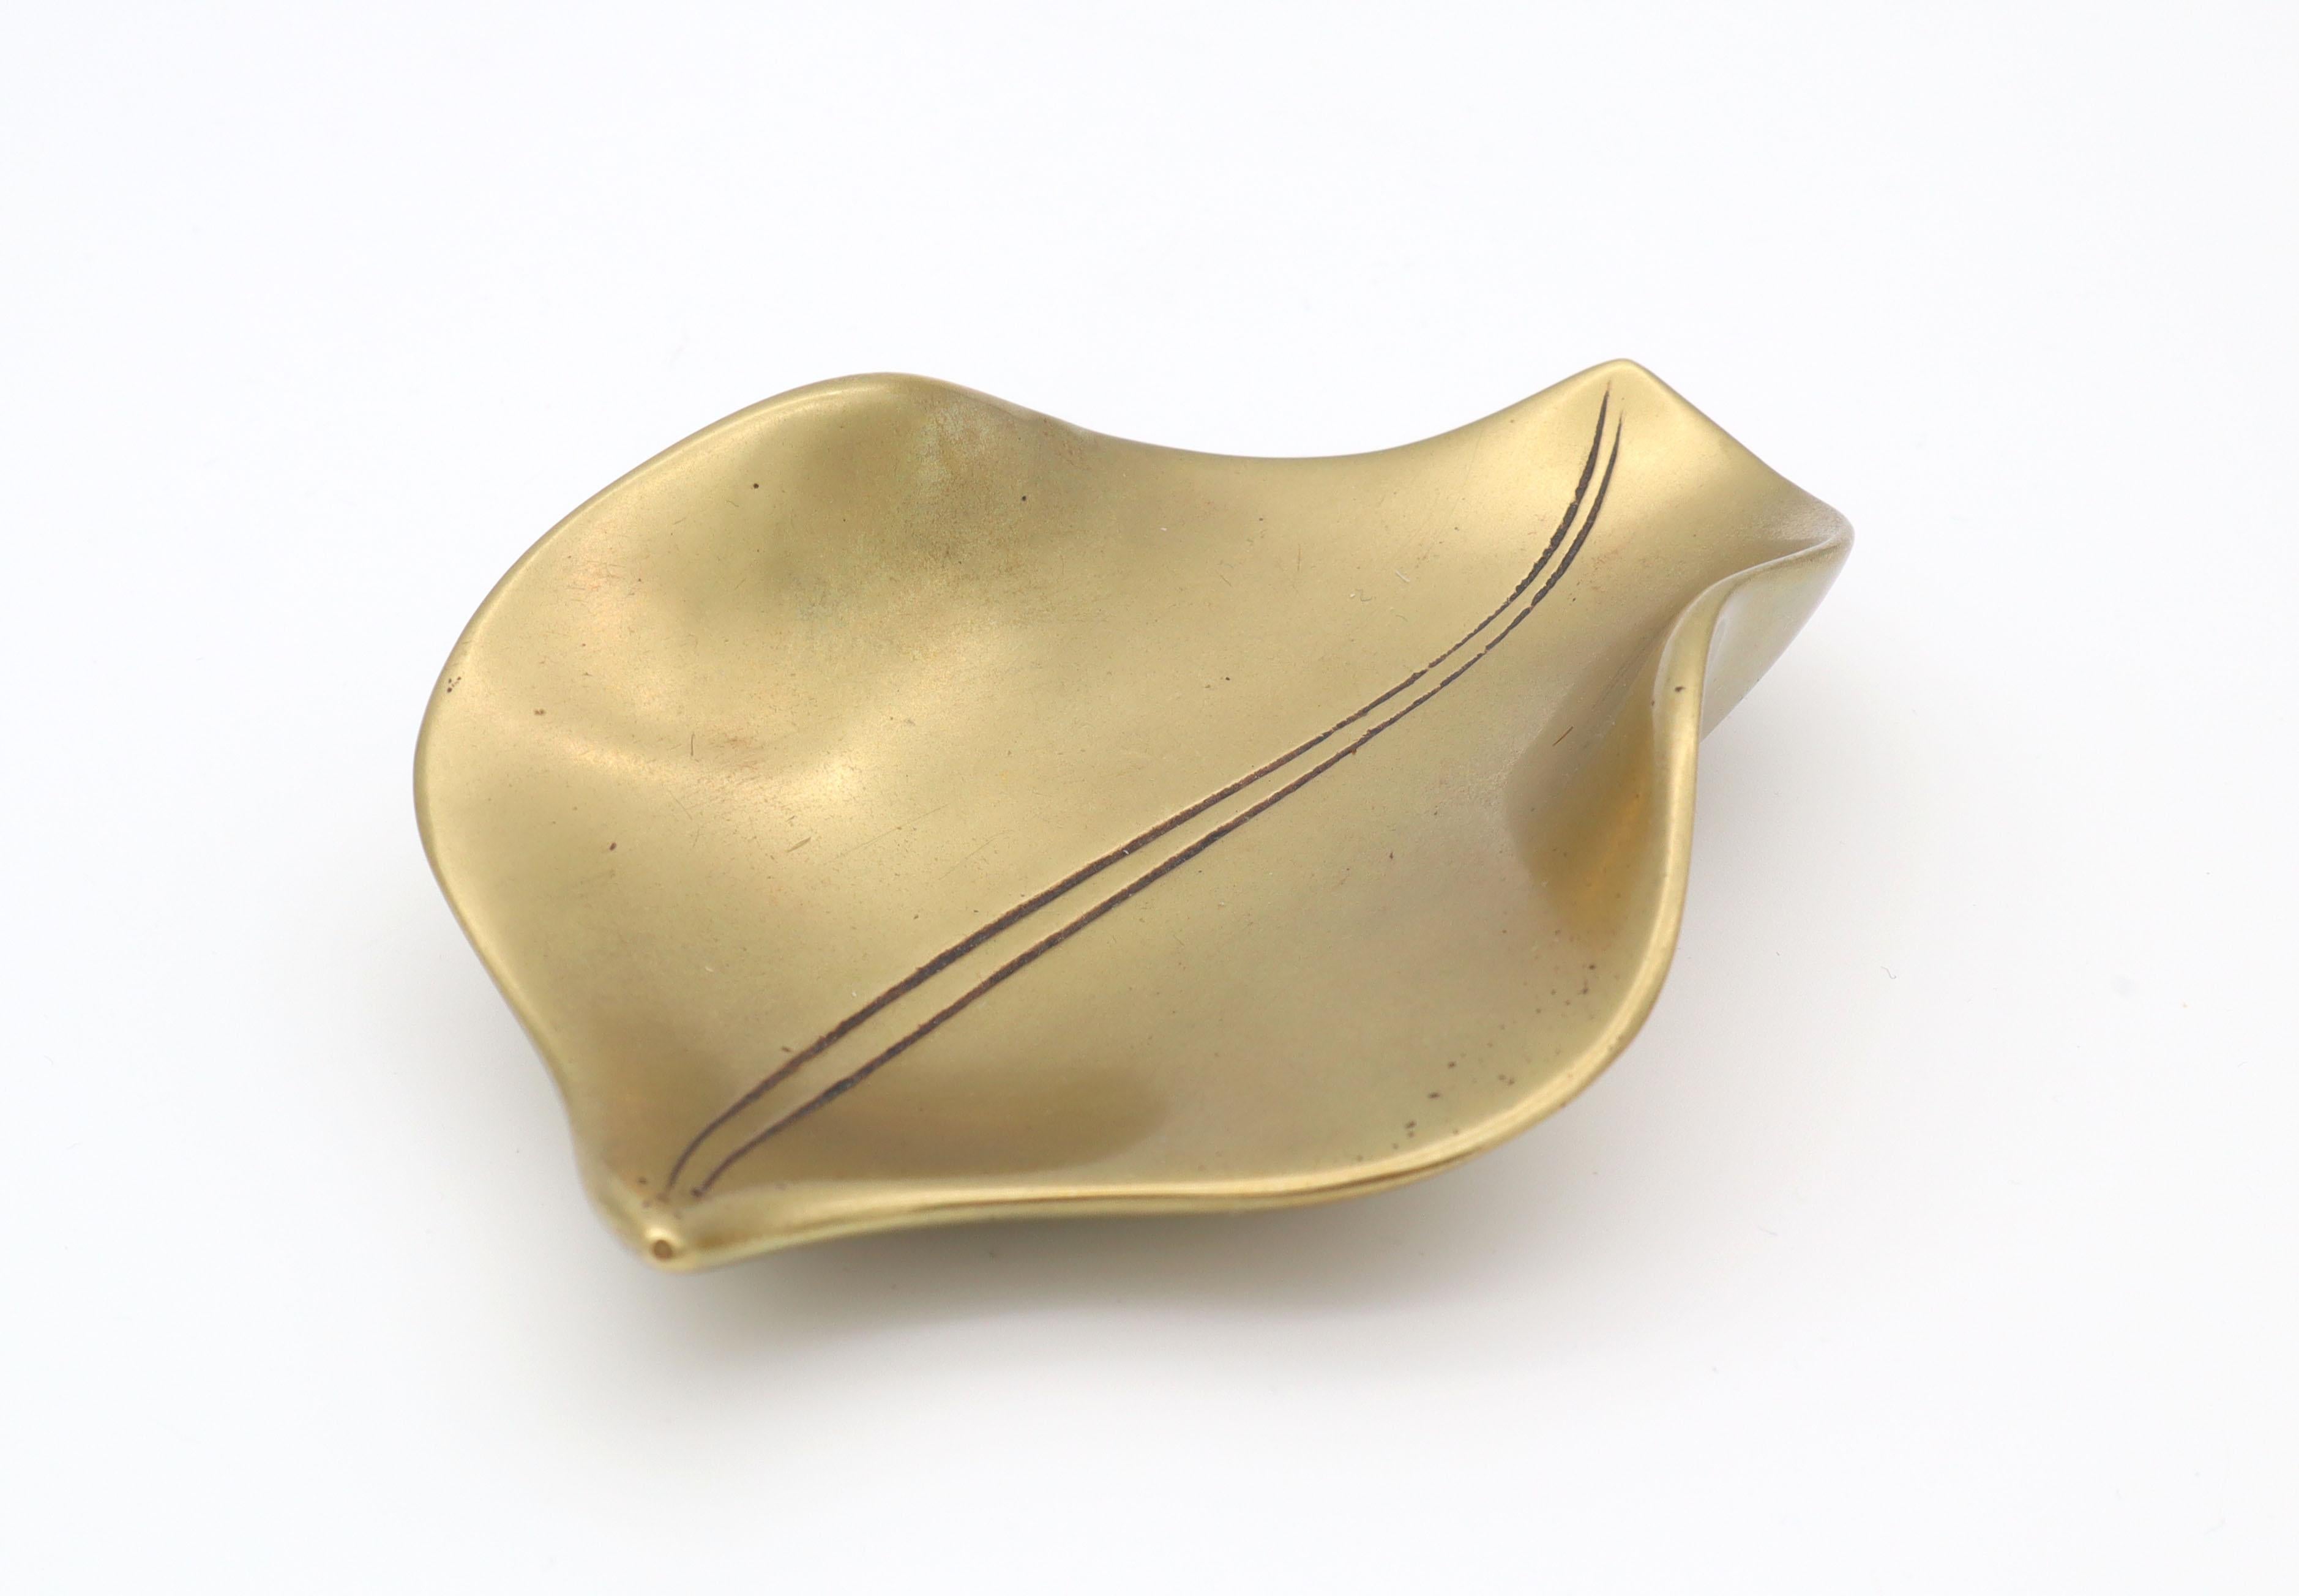 Original vintage solid brass ashtray in the shape of a leaf, by Carl Auböck 1950.
Production number 3141, pictured in the Book 